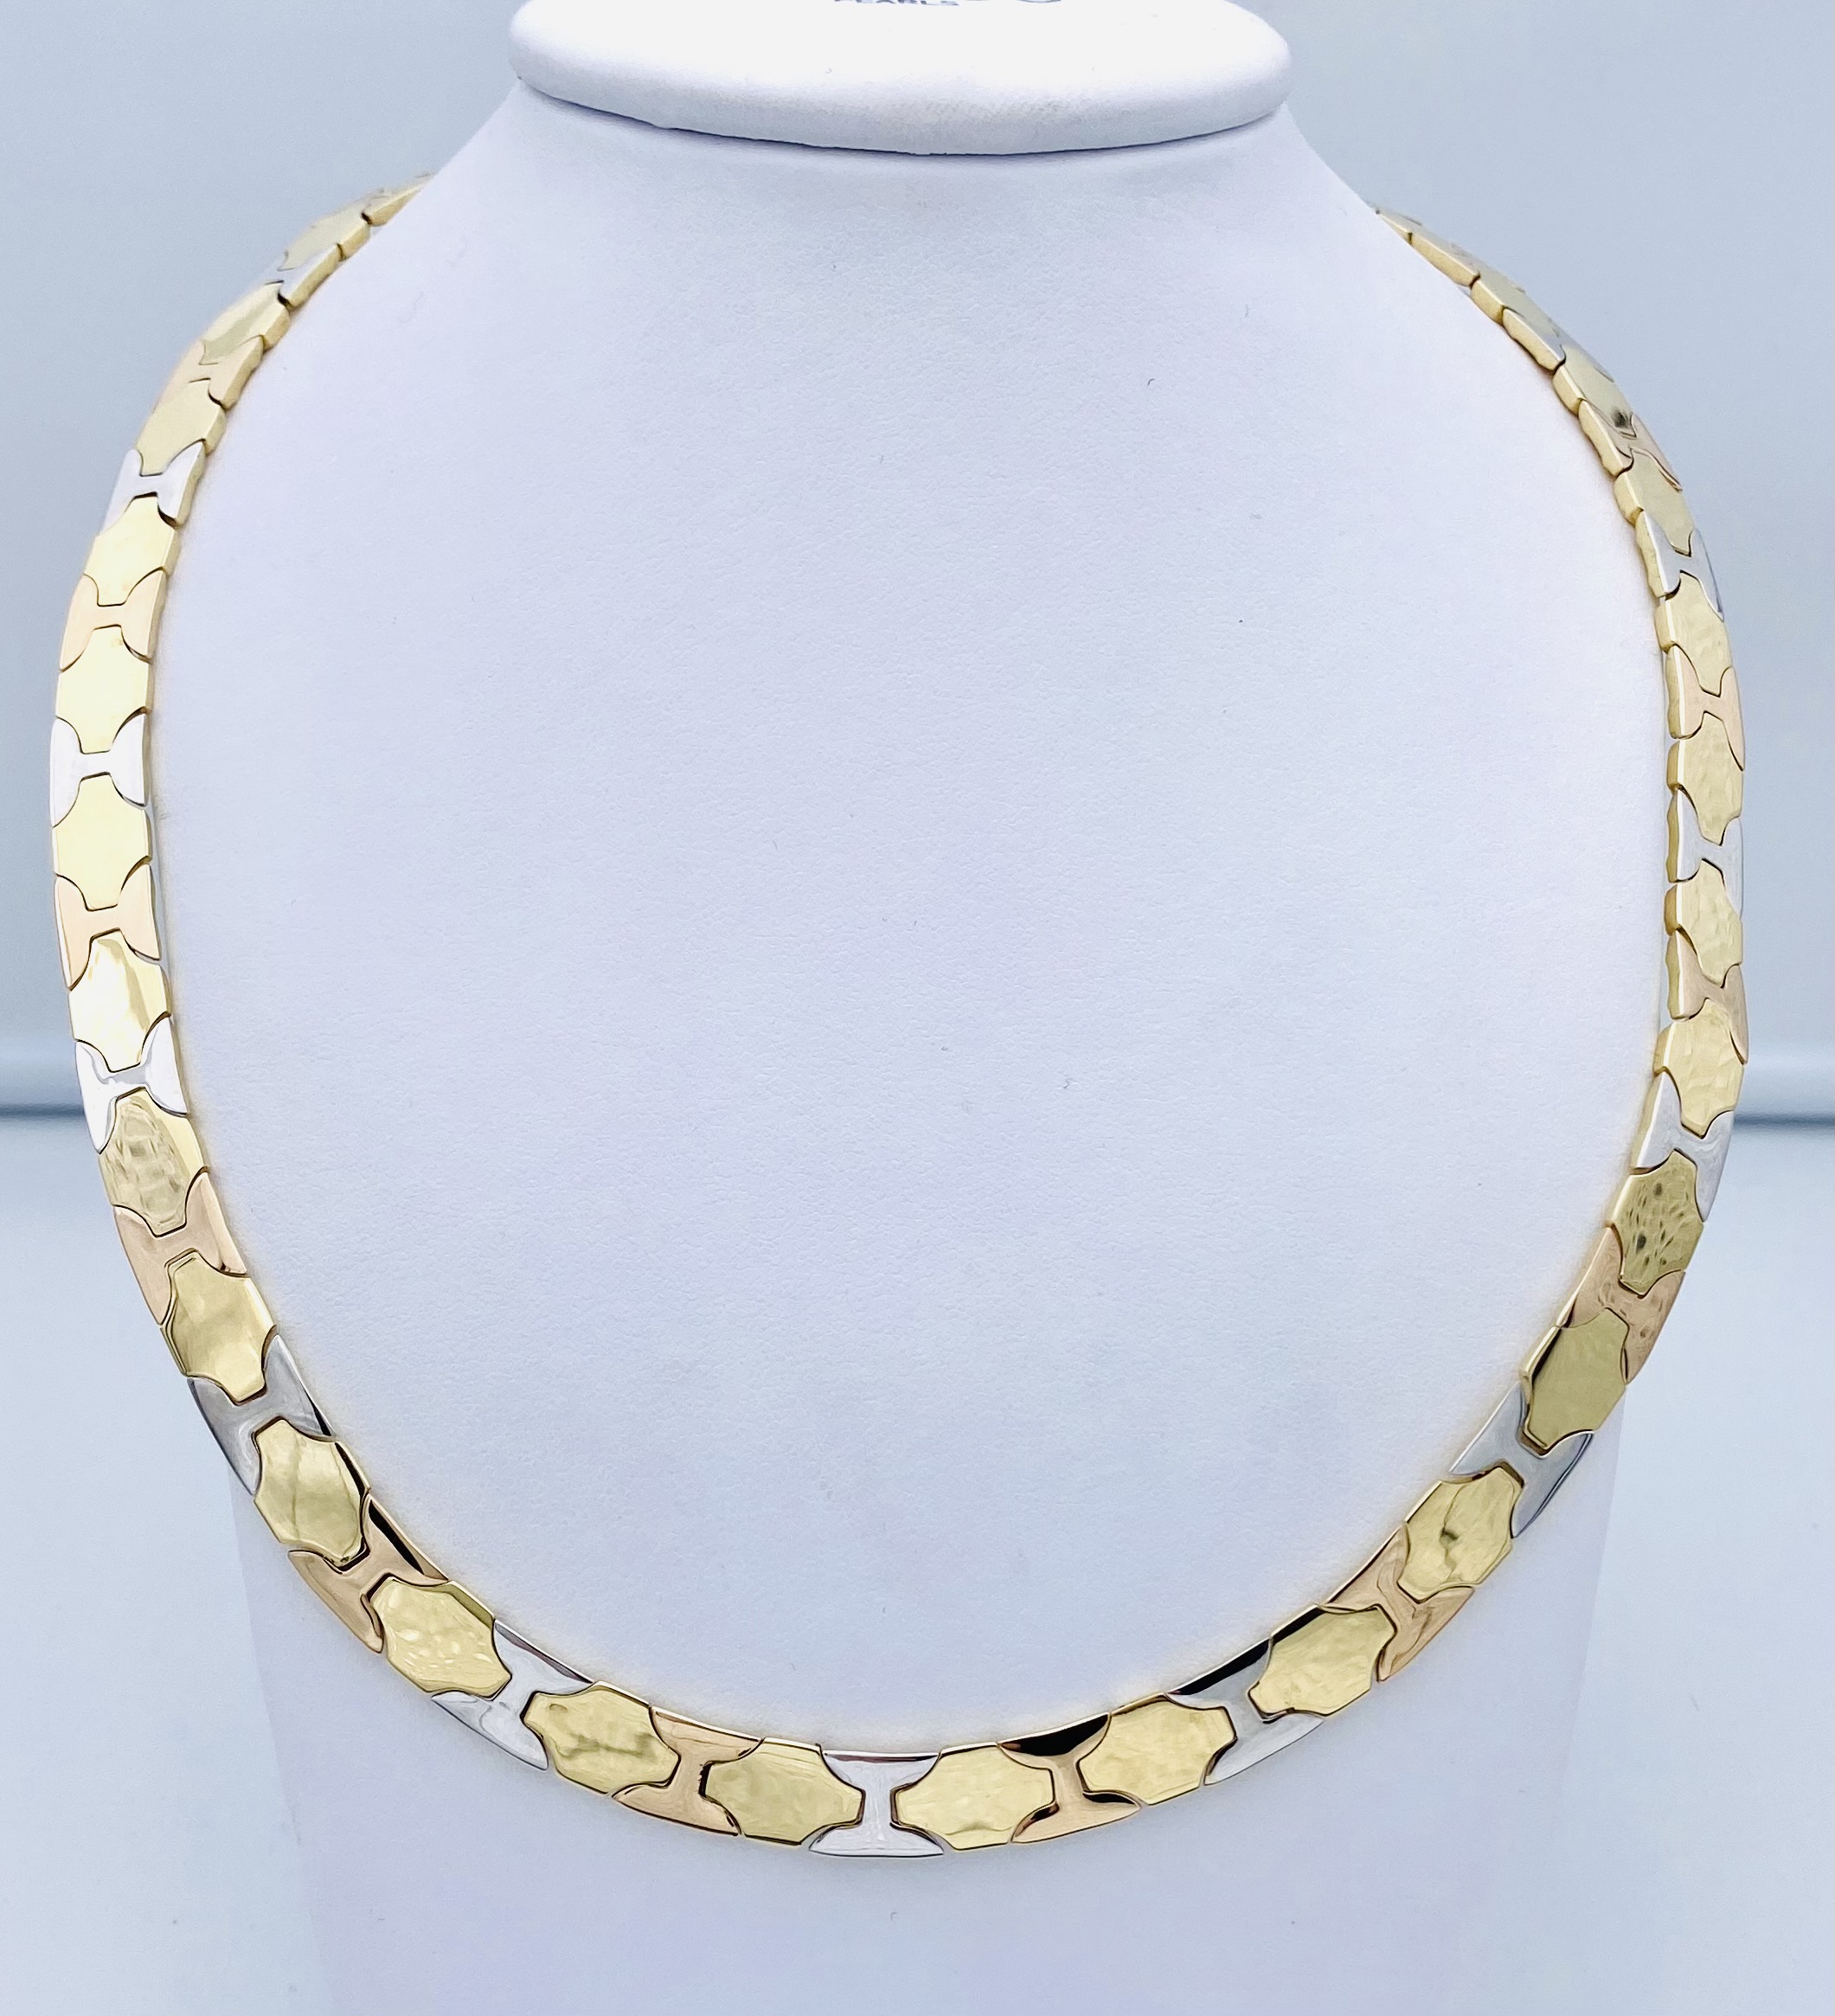 Men’s round necklace yellow gold,white,pink 750% GR. 45,30 ART. CUOC01